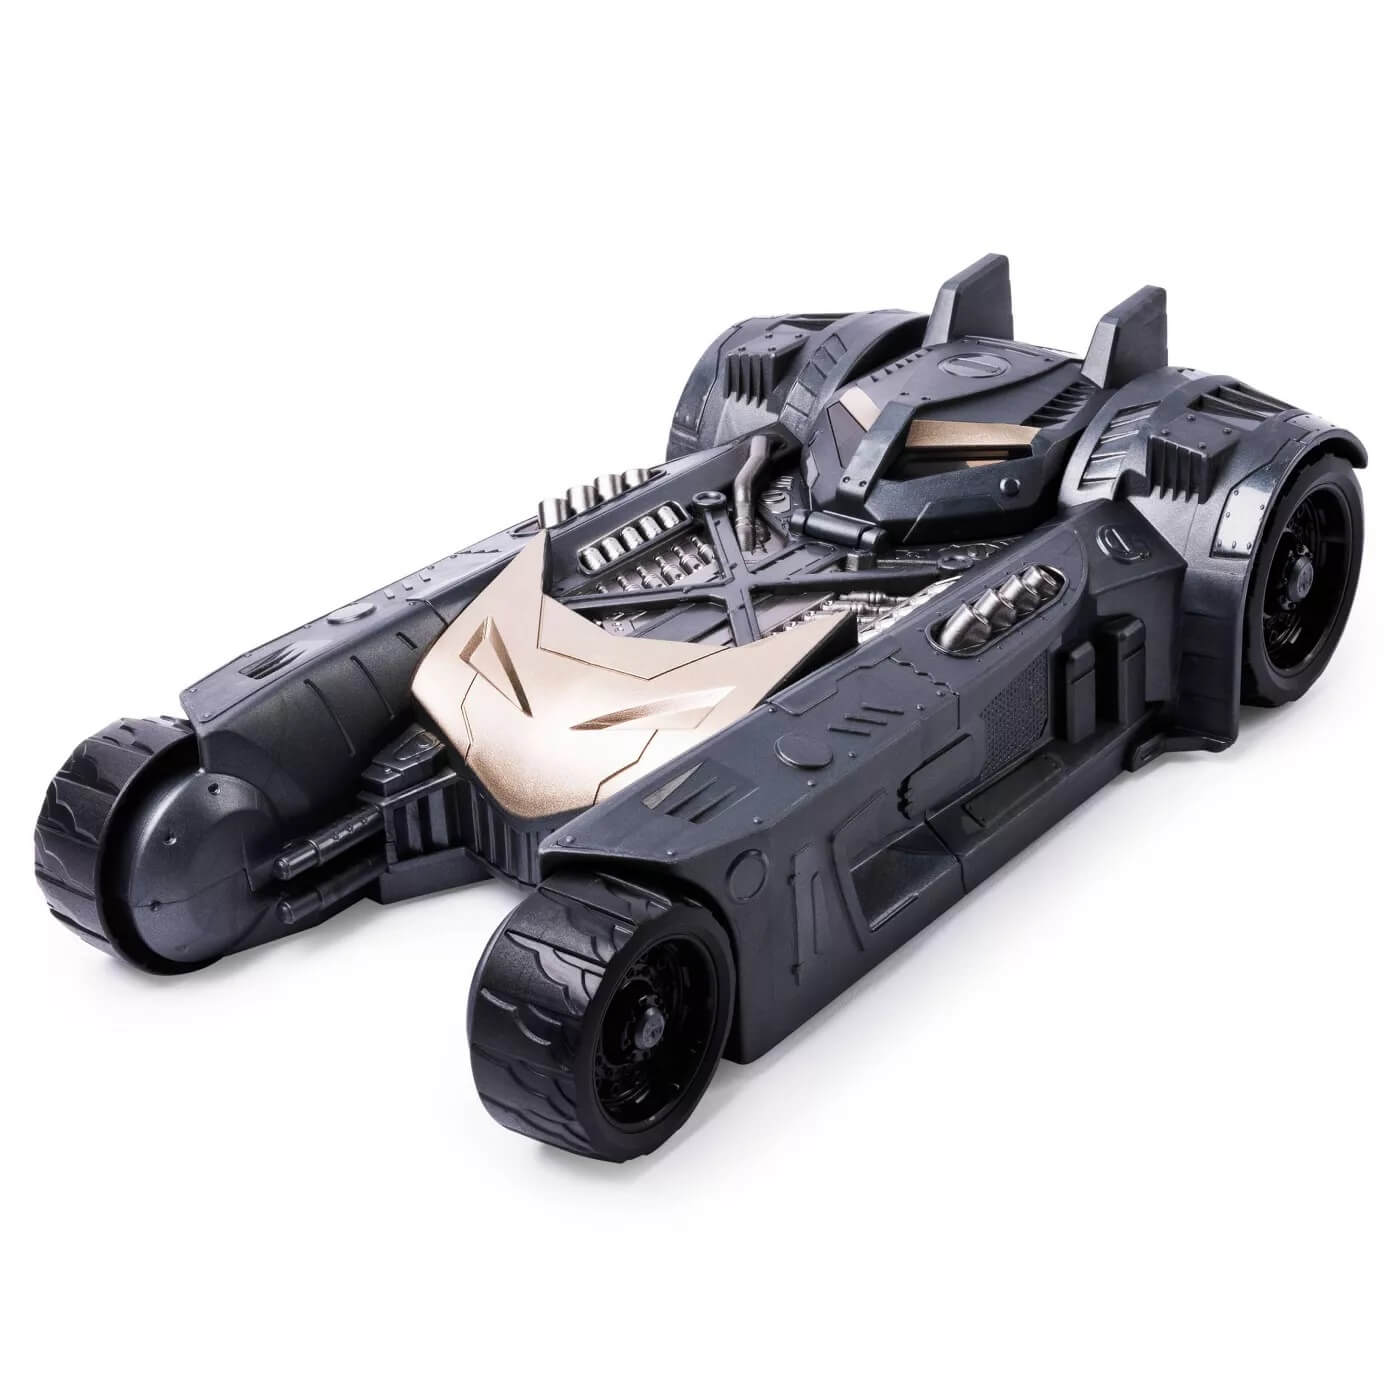 The Caped Crusader Batmobile 2 in 1 Vehicle